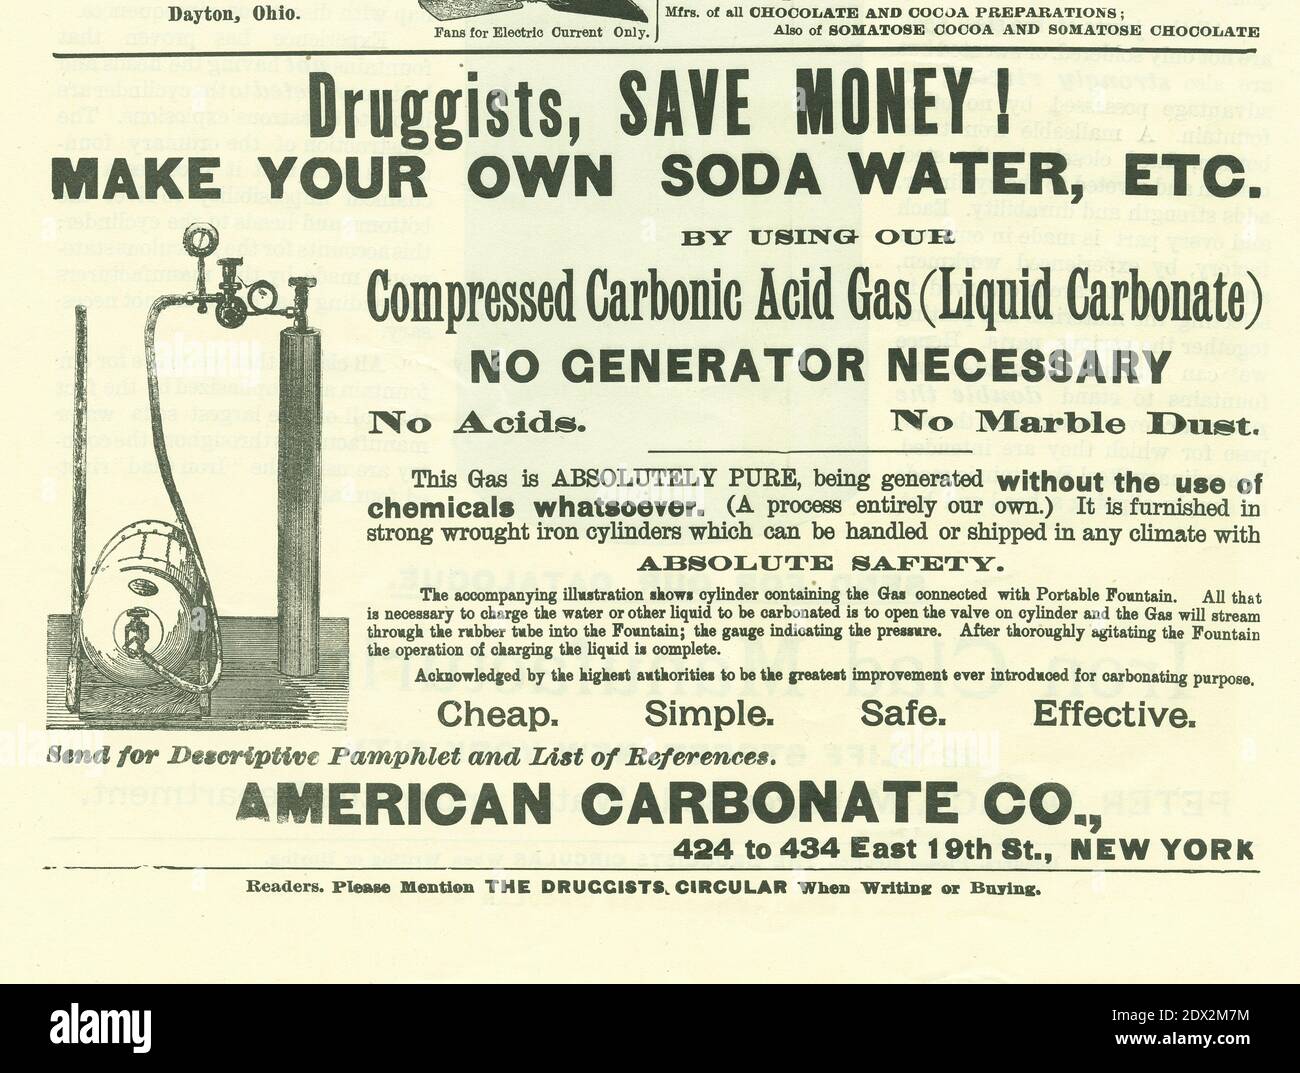 Antique June 1896 advertisement by American Carbonate Co of New York for pure “Compressed Carbonic Acid Gas (Liquid Carbonate)” in The Druggists Circular and Chemical Gazette. SOURCE: ORIGINAL ADVERTISEMENT Stock Photo